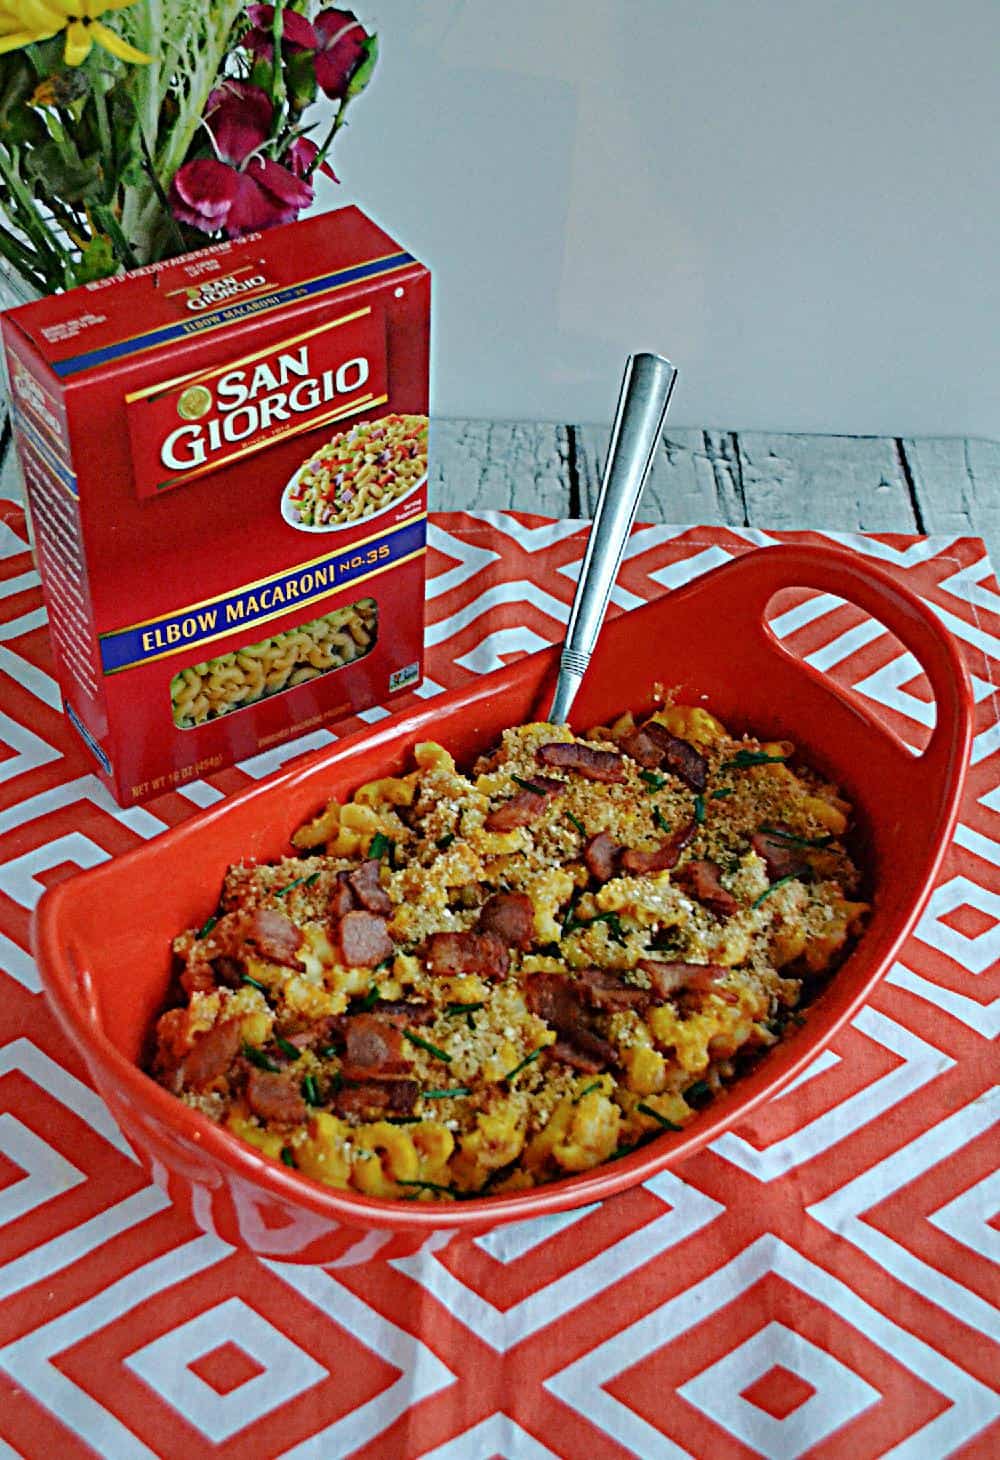 A baking dish of macaroni and cheese with a box of macaroni behind it.